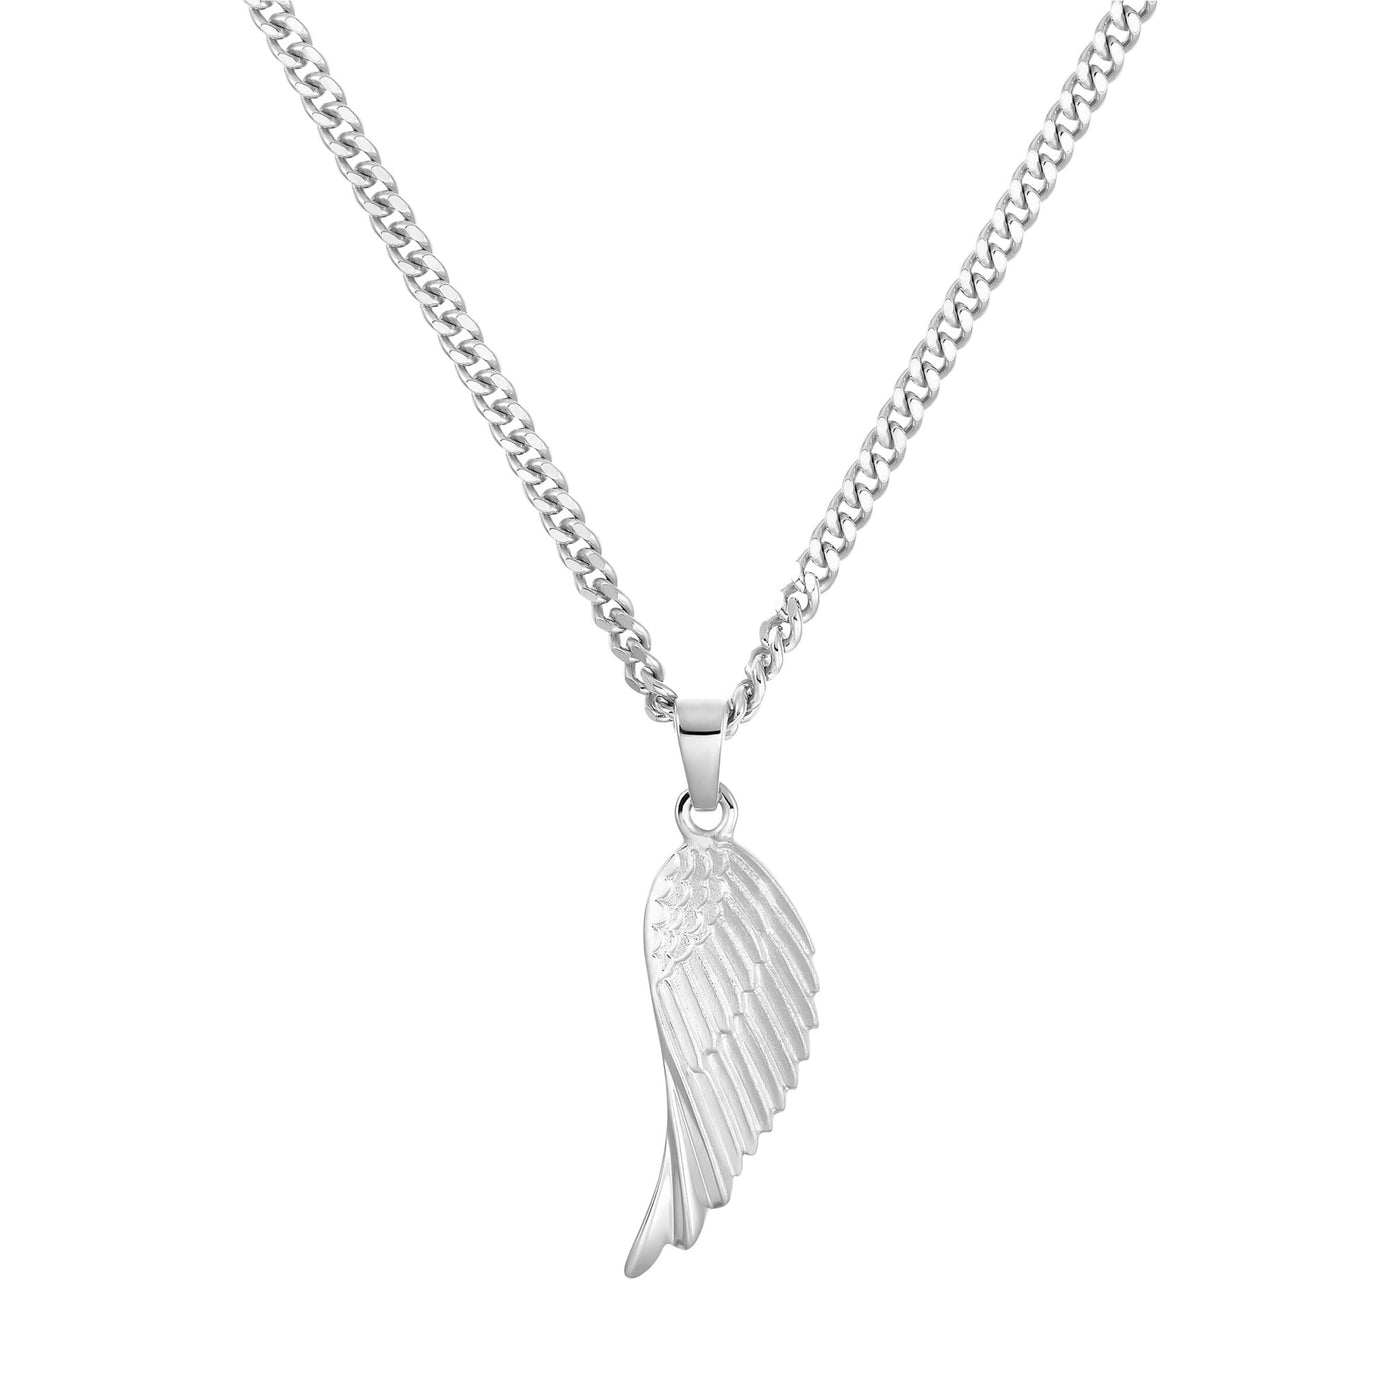 WING NECKLACE 925 SILVER RHODIUM PLATED - IDENTIM®